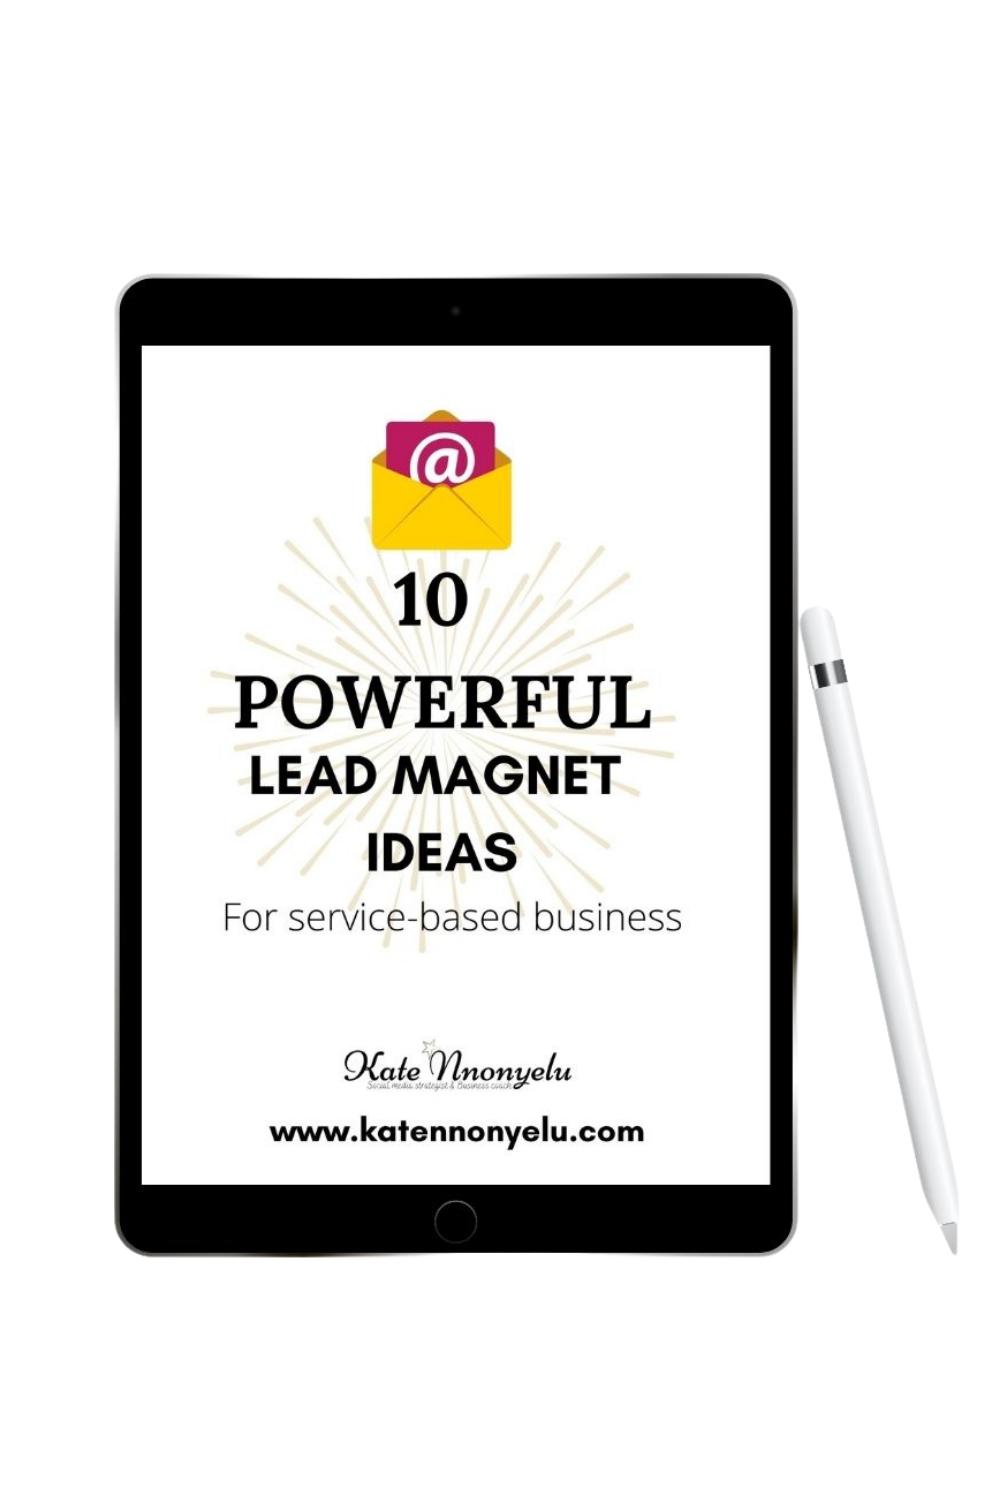 10 powerful lead magnet